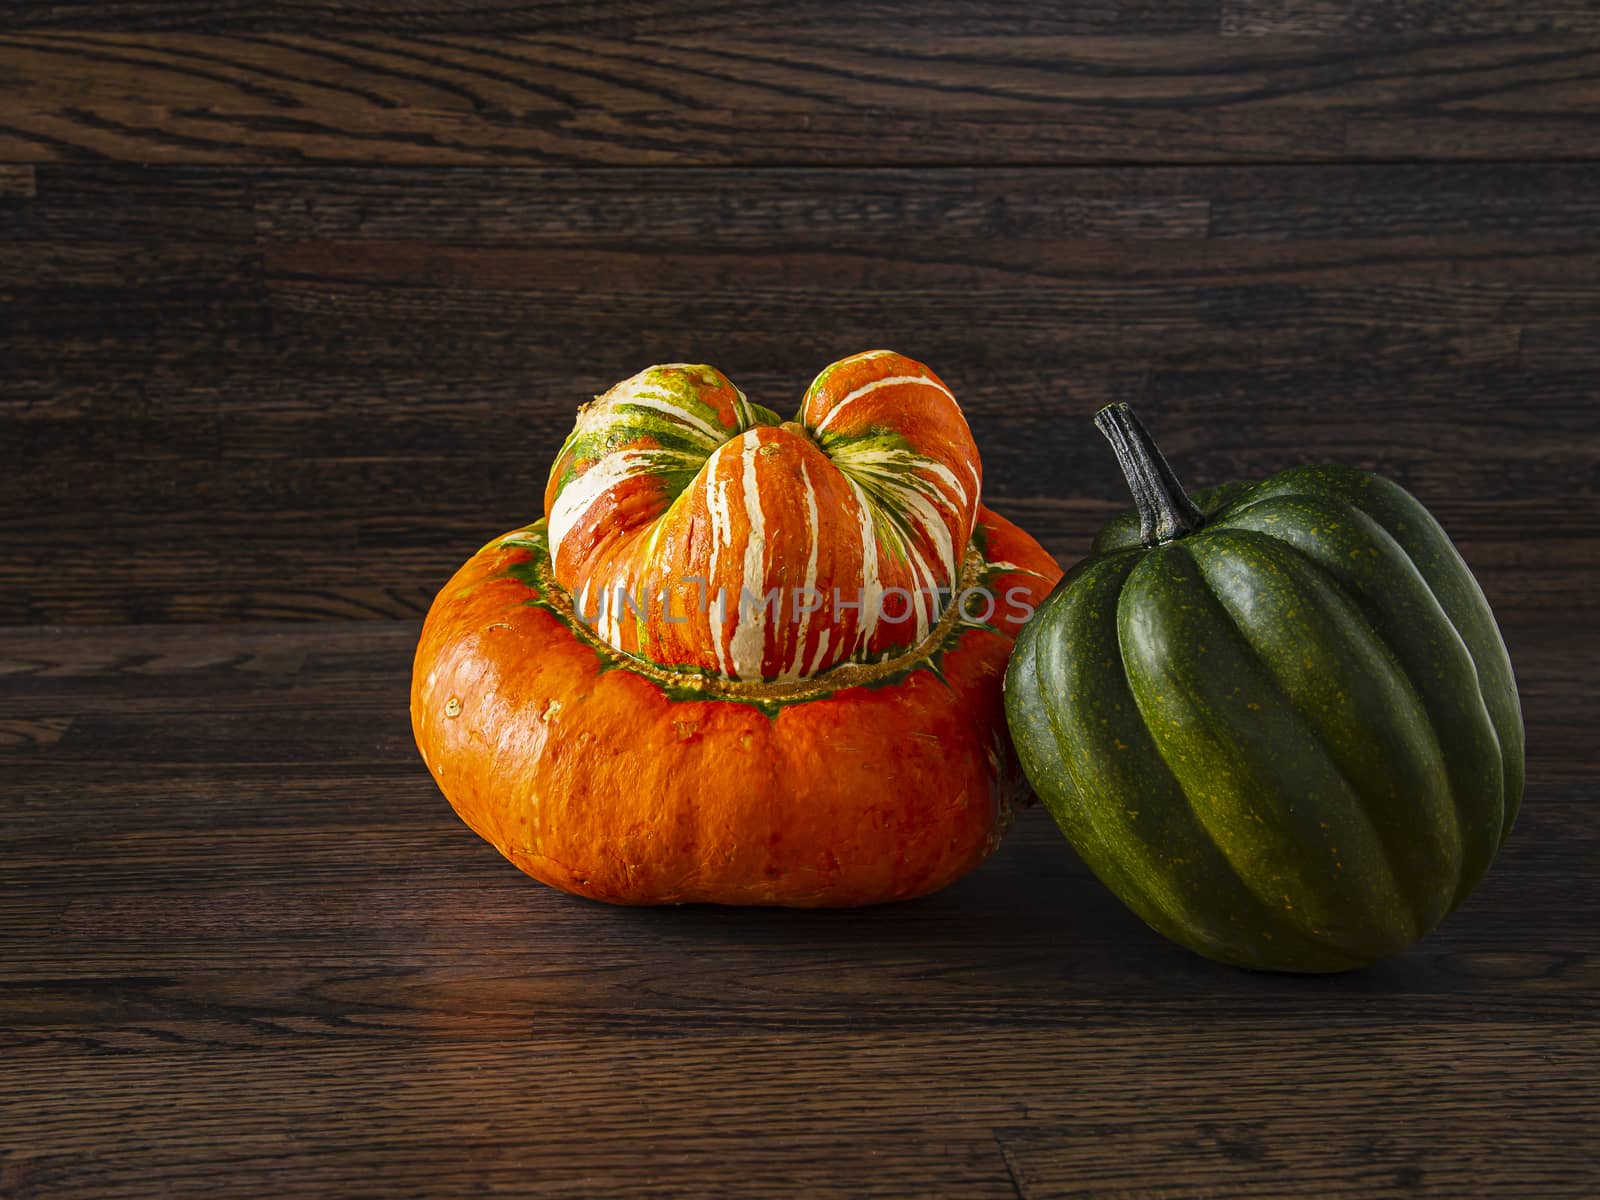 Turban squash and sweet dumbling by mypstudio